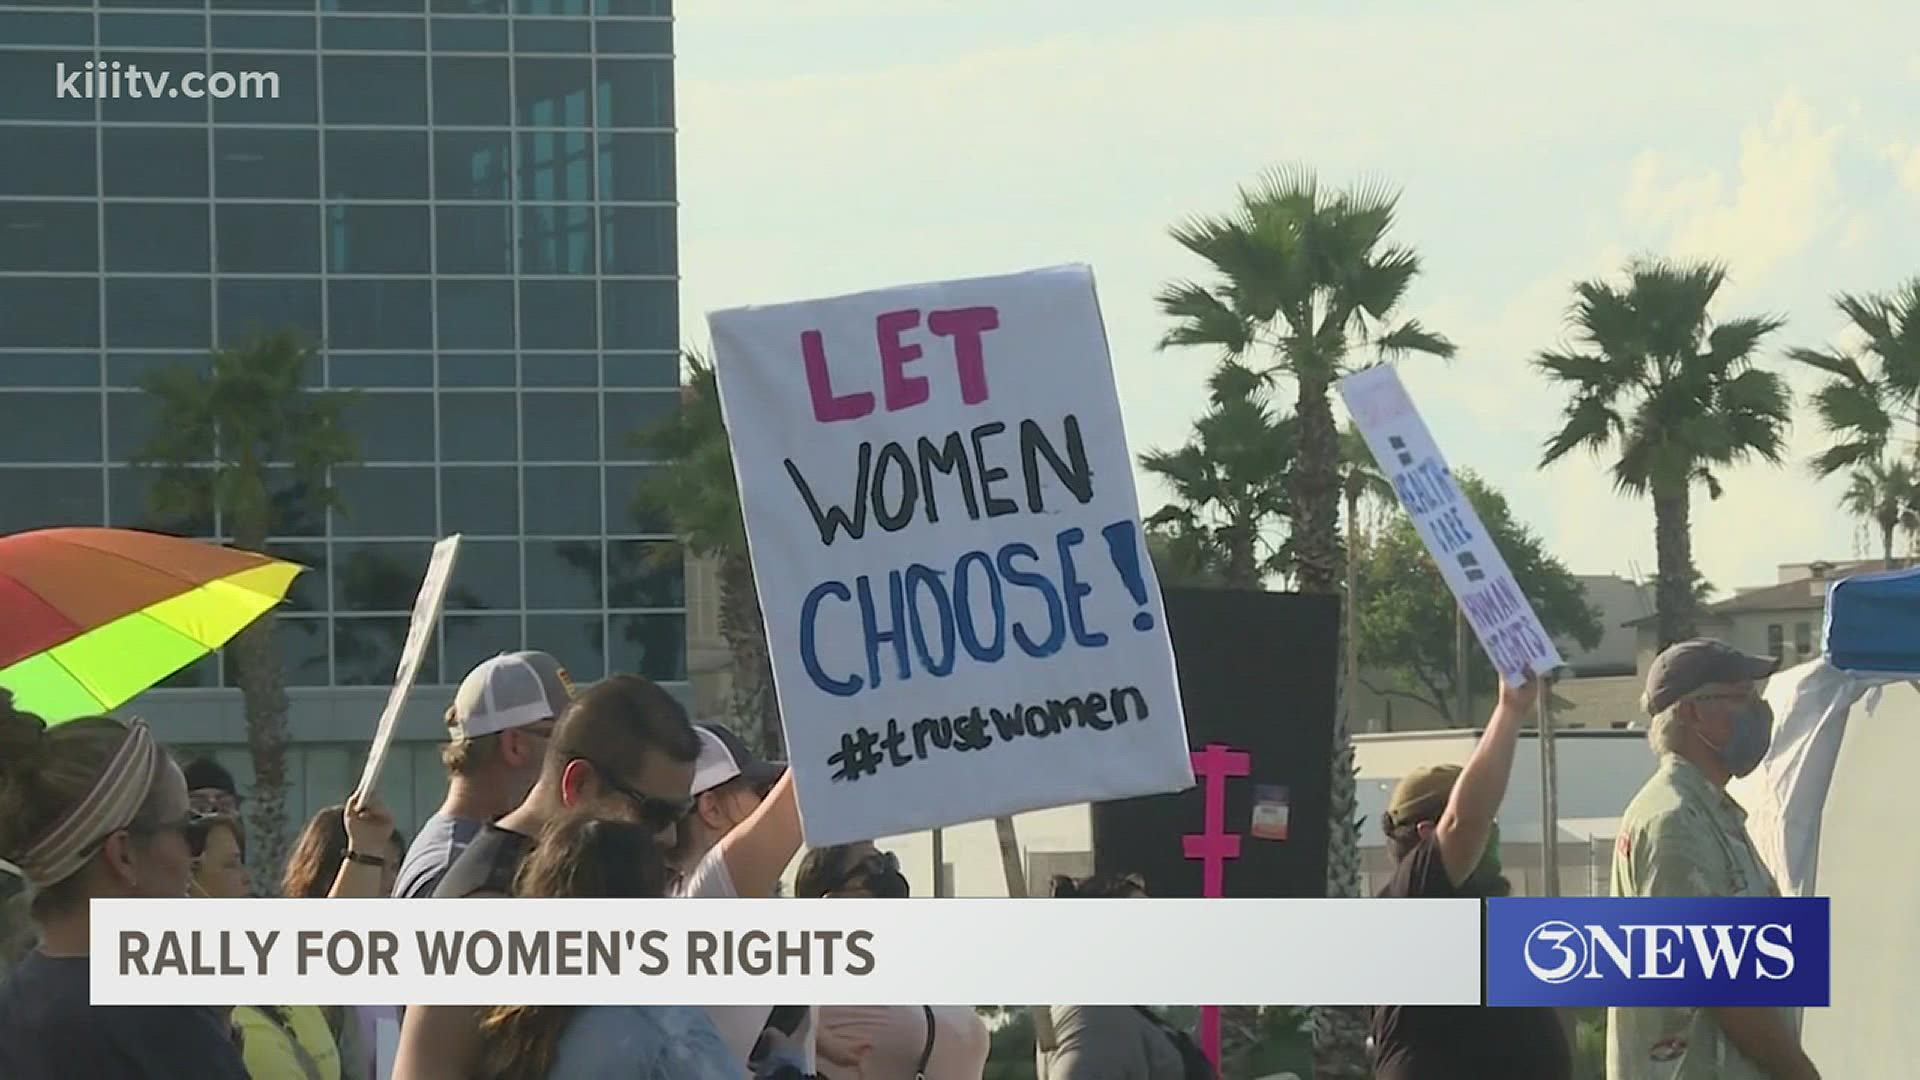 Residents of all ages gathered, rallying for women’s rights. One of the main topic of discussion was the most recent abortion laws passed by Gov. Abbott.